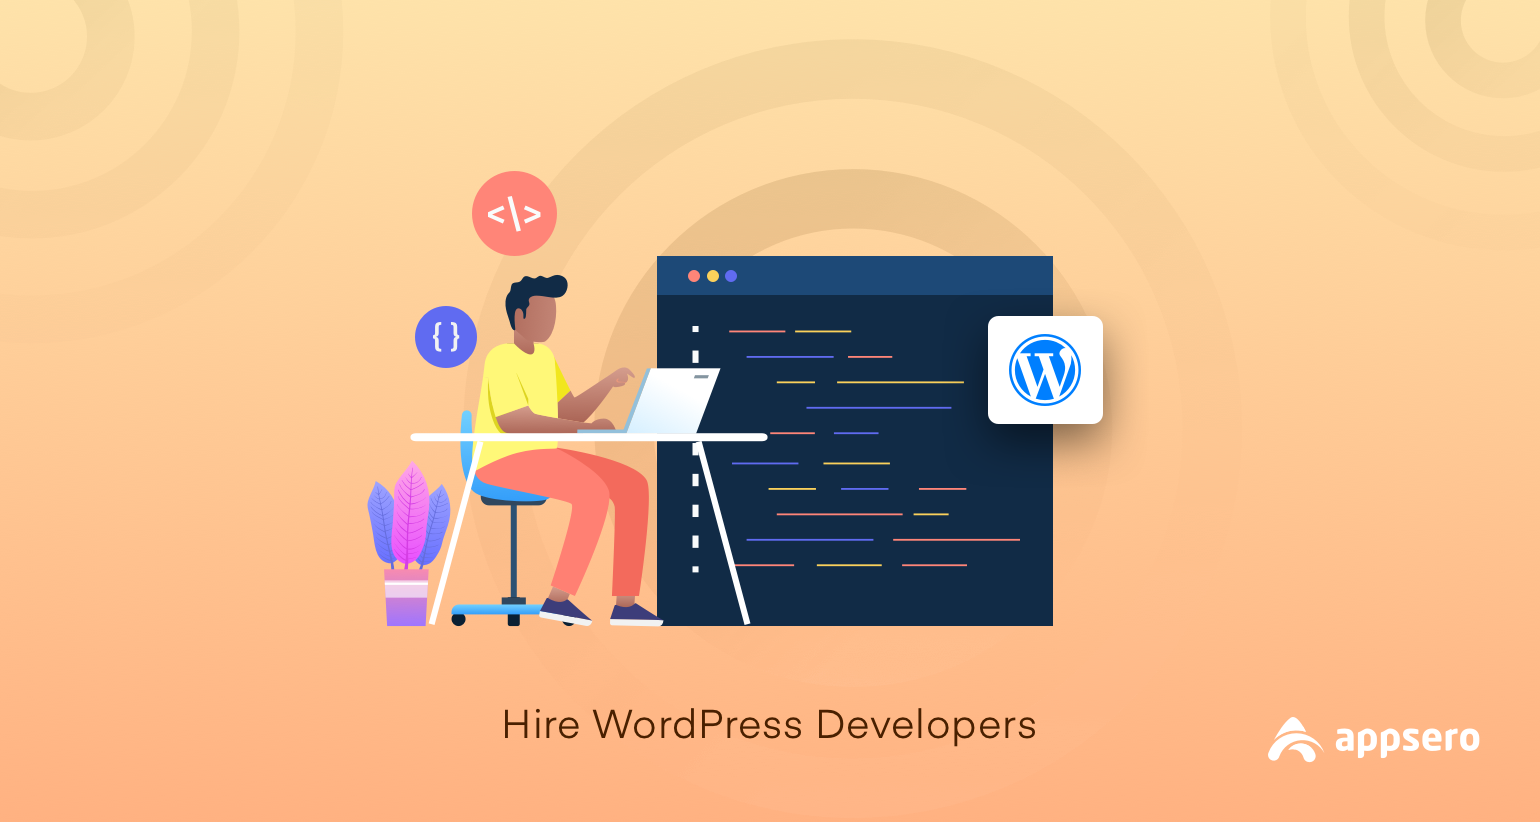 How To Hire WordPress Developers Online: Follow 5 Simple Steps